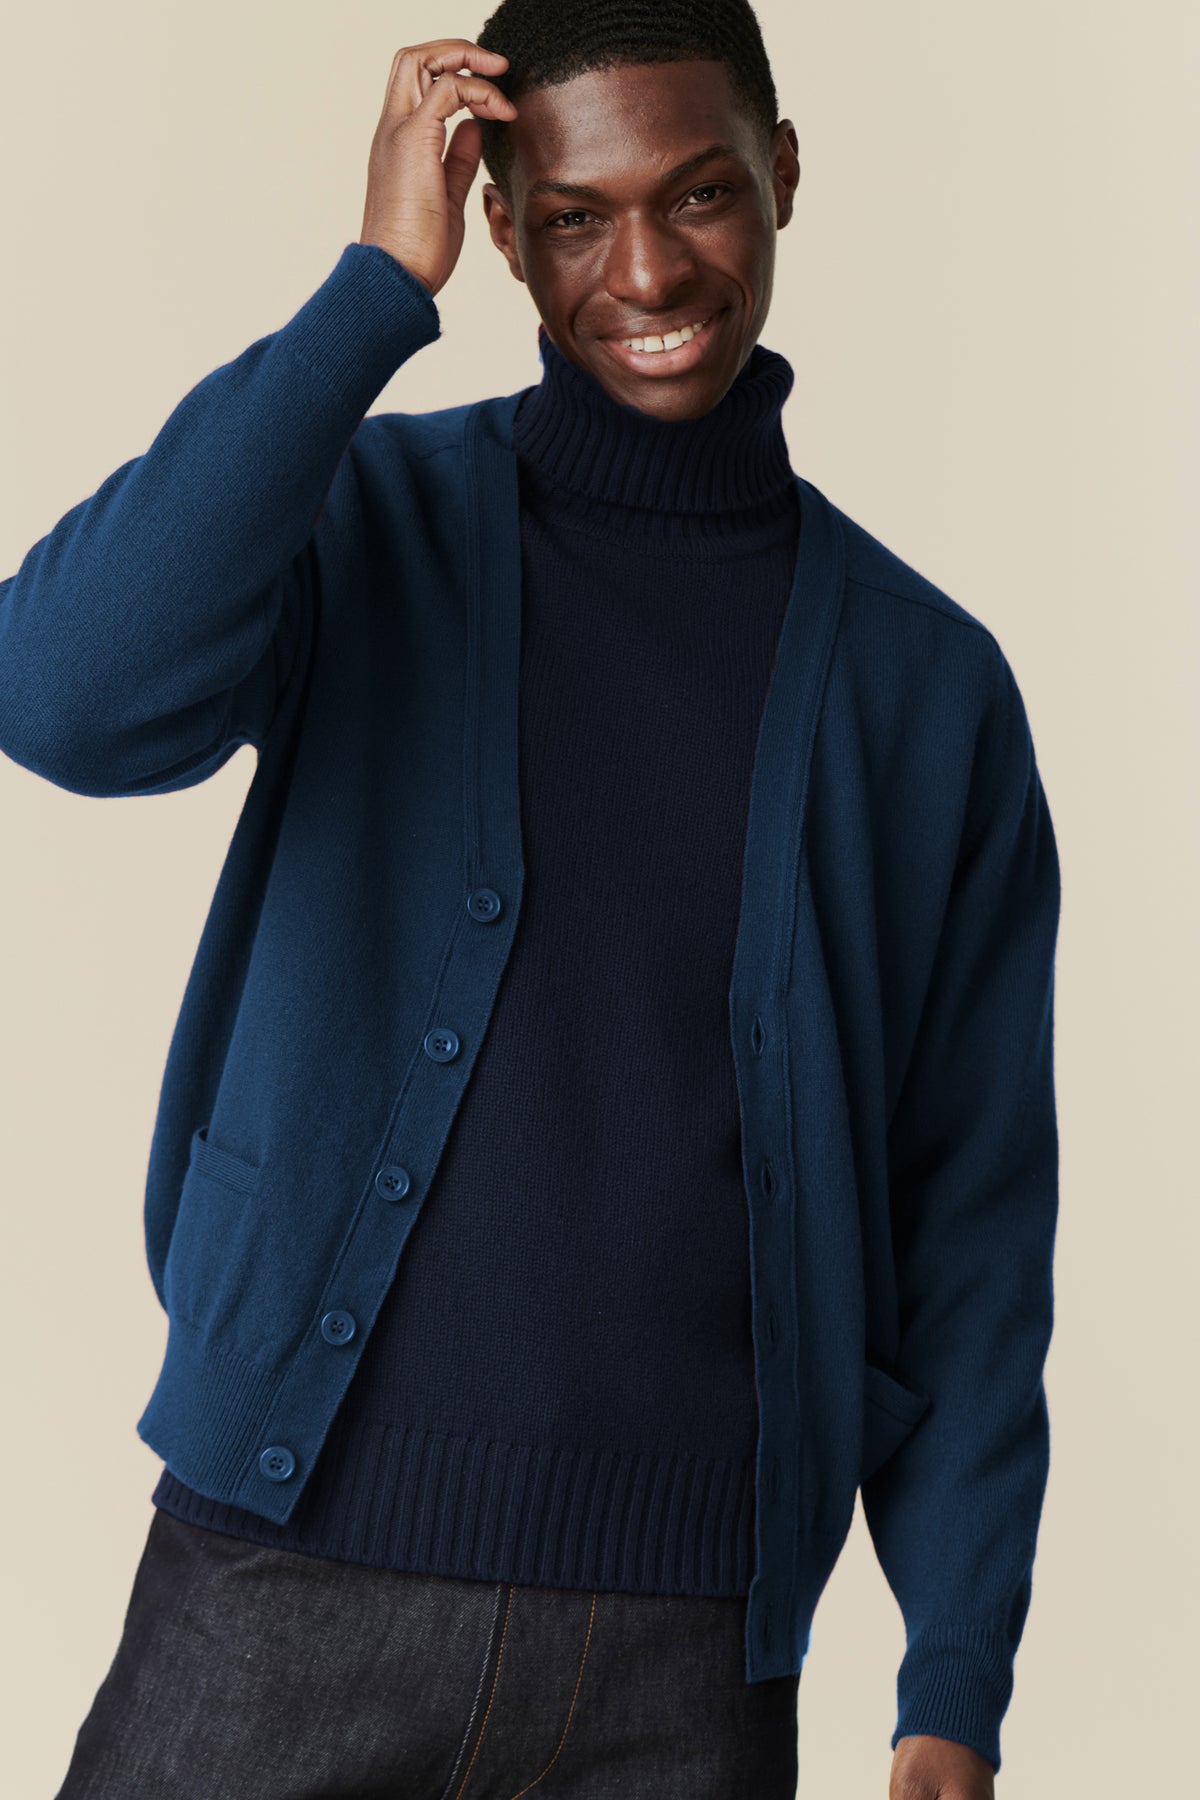 
            Smiley, black male wearing lambswool v neck cardigan in bright blue over navy roll neck